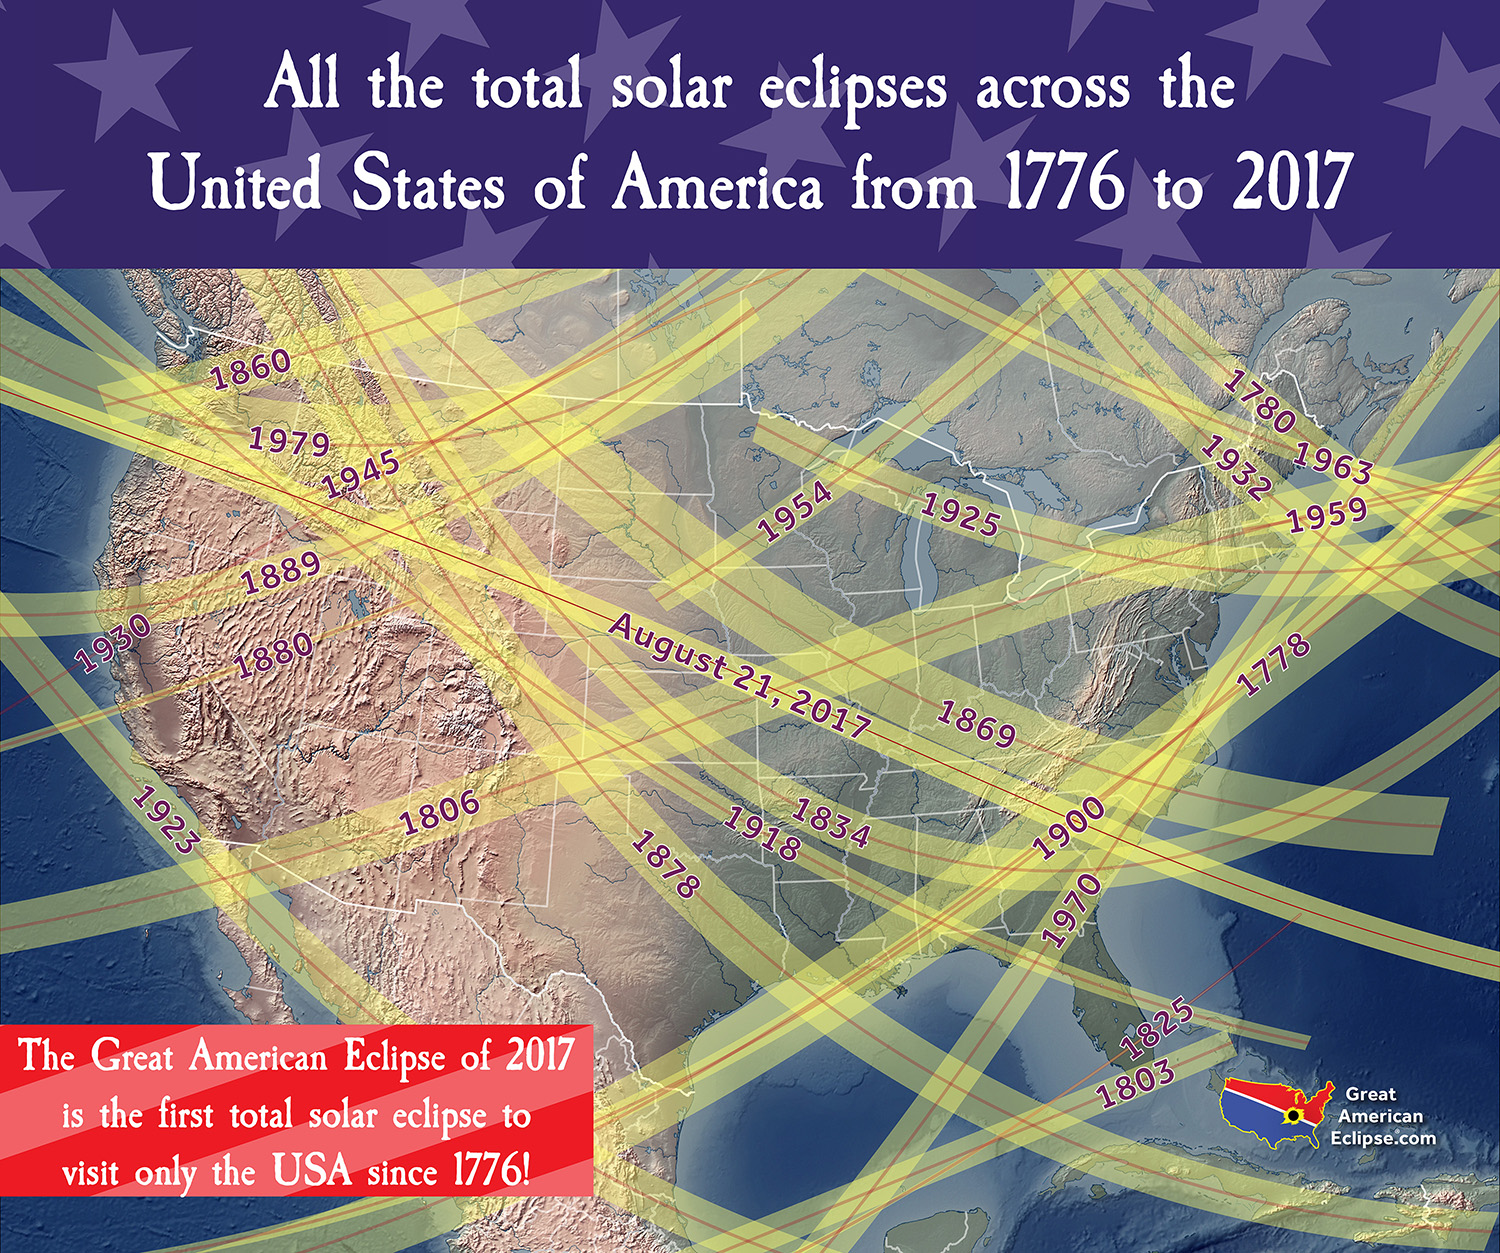 Two dozen yellow bands drape like sashes across a map of the United States. Each is labeled with the year the eclipse occurred.